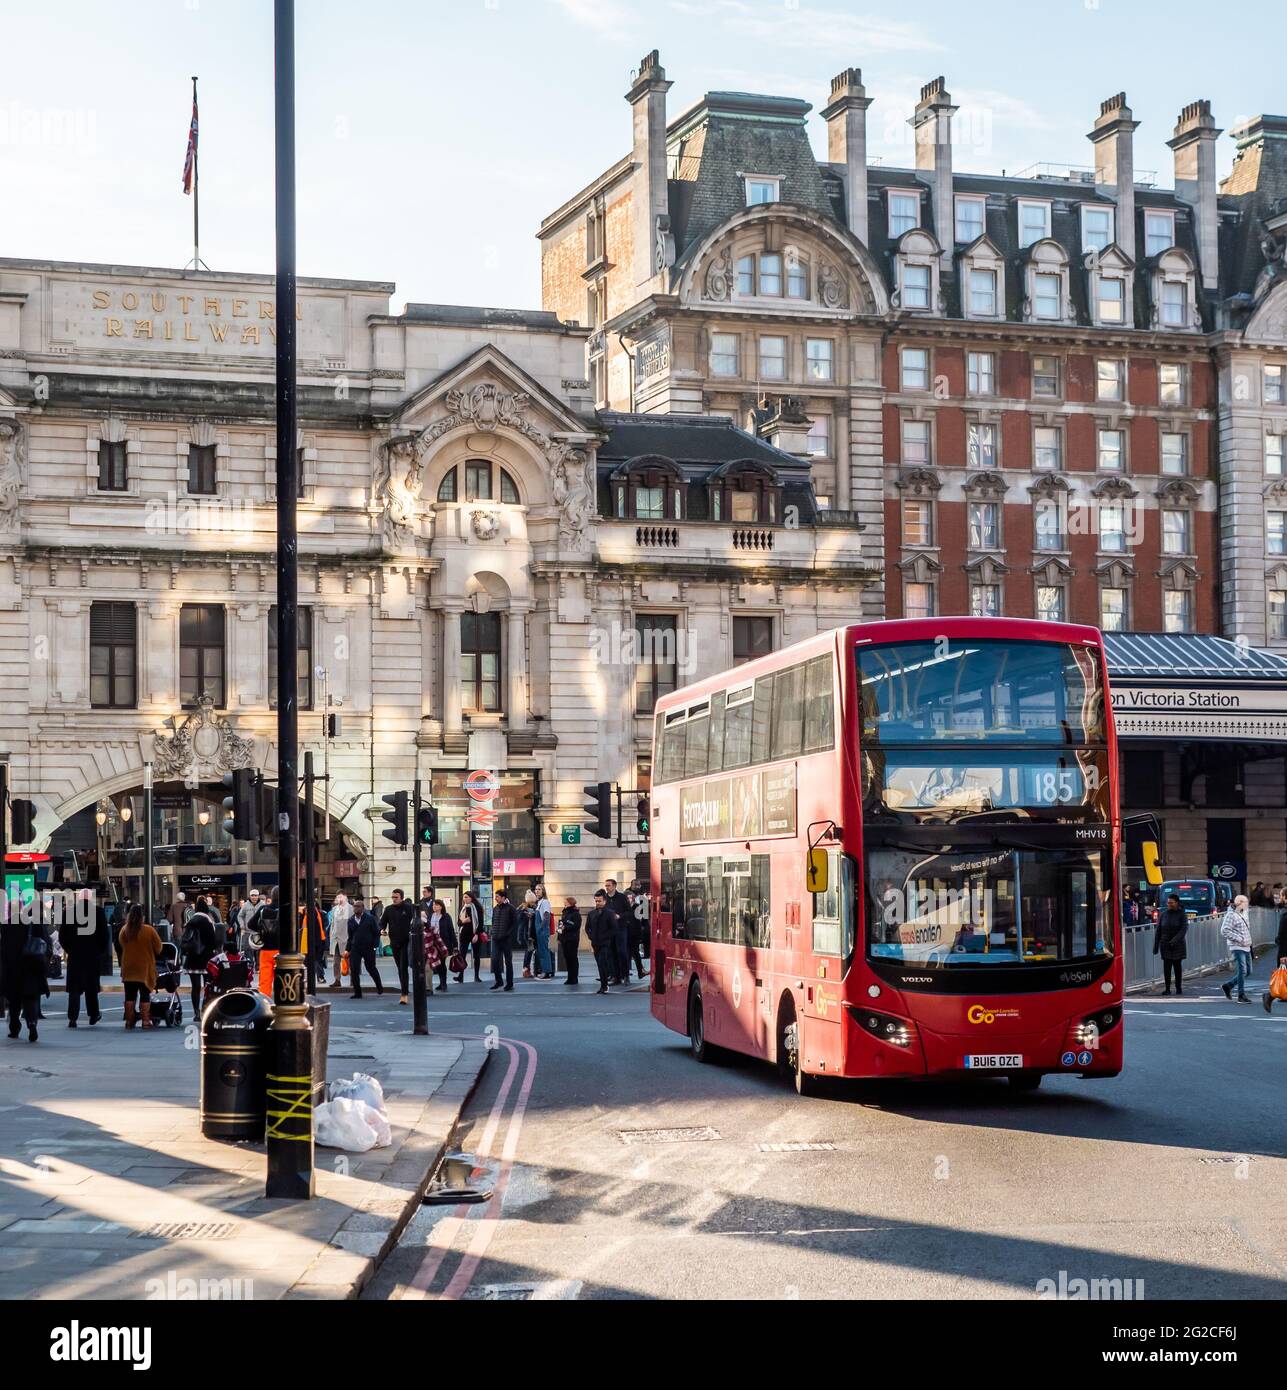 Victoria Railway Station, London. A modern red double decker bus arriving at its marked destination with commuters and the station façade behind. Stock Photo